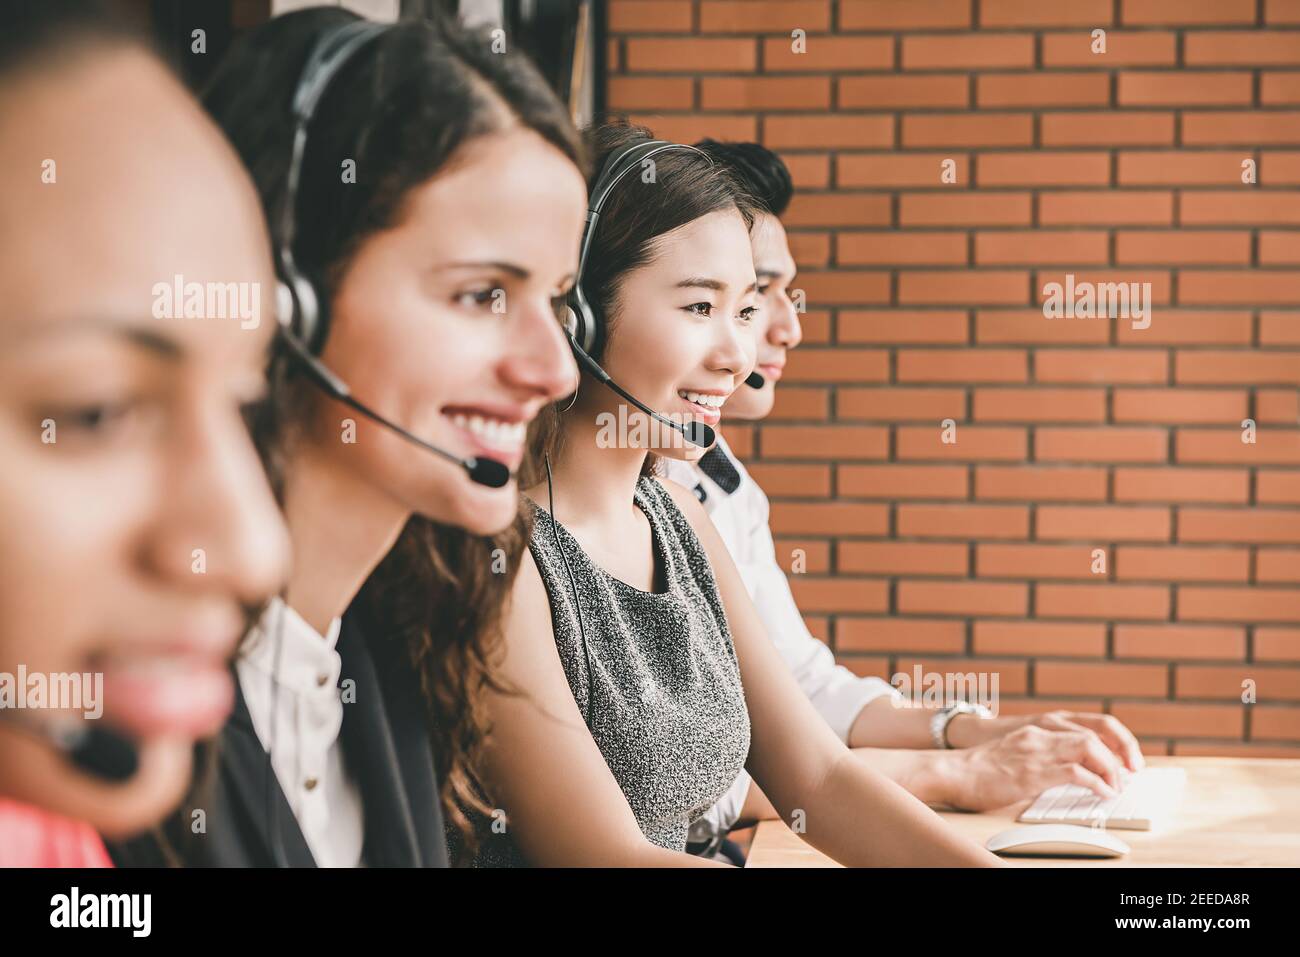 Smiling multiethnic telemarketing customer service agent team working in call center office with healpful attutude Stock Photo